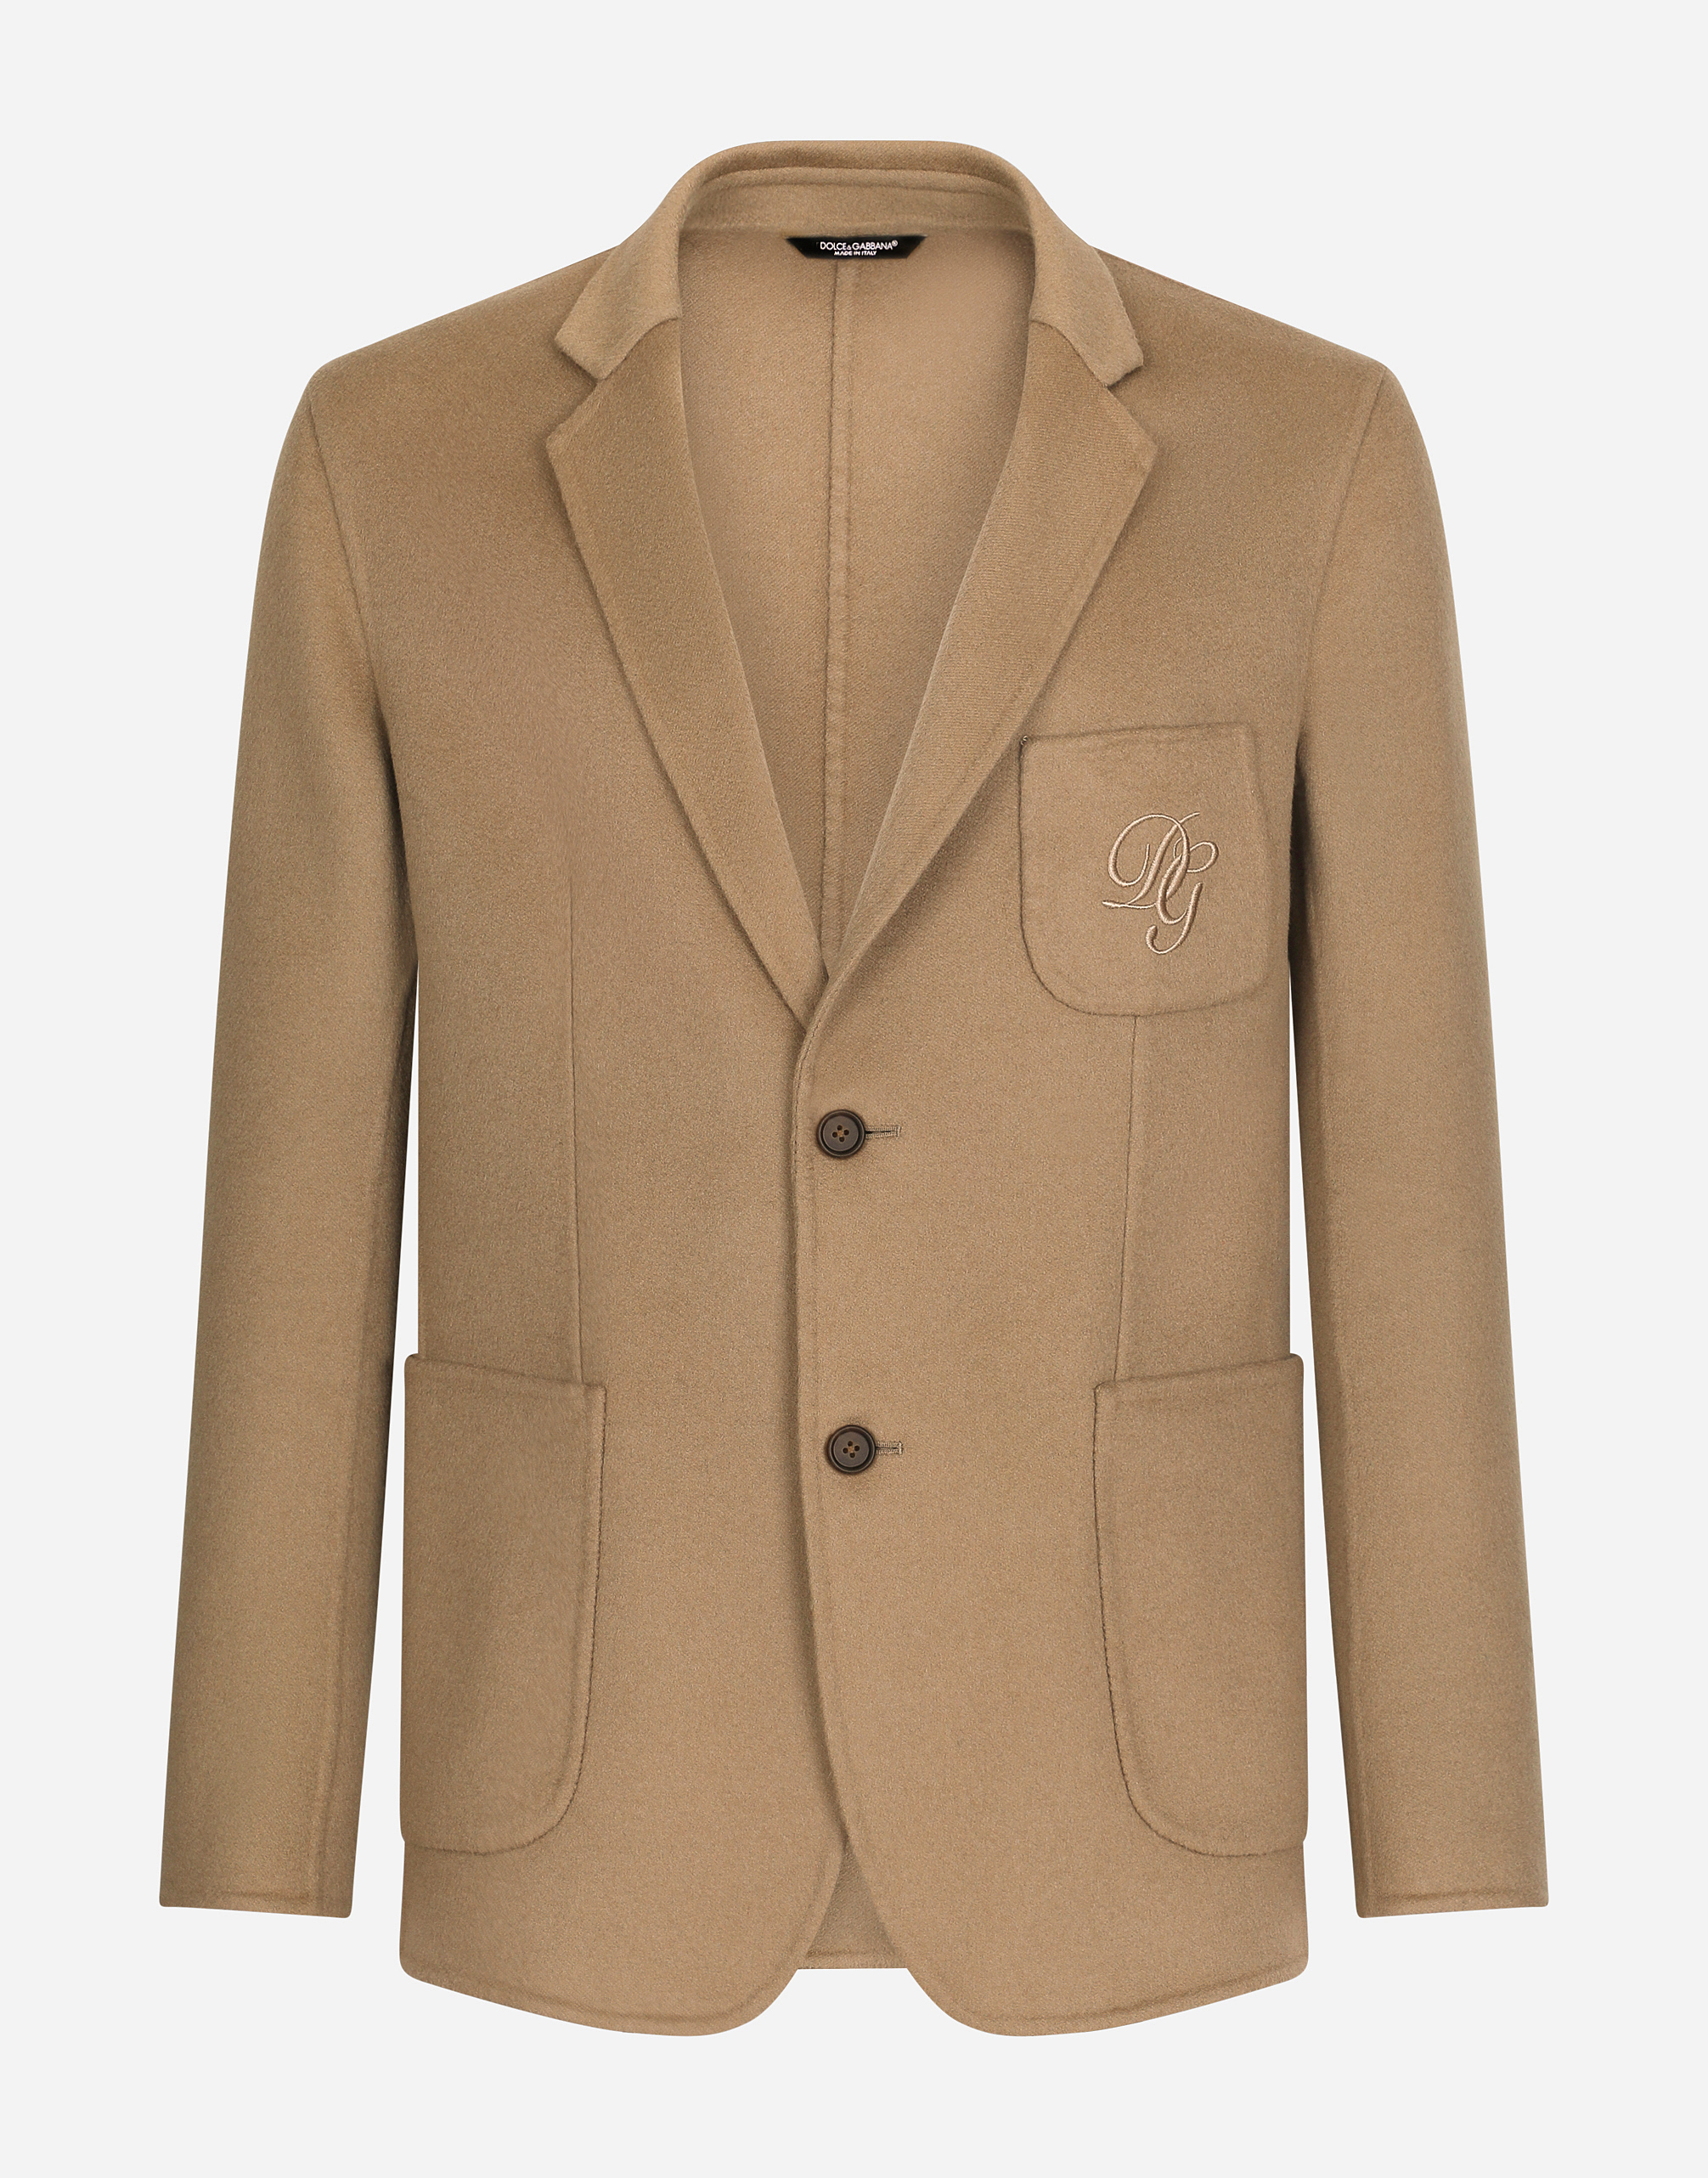 Deconstructed camel hair blazer with embroidery in Pale Pink